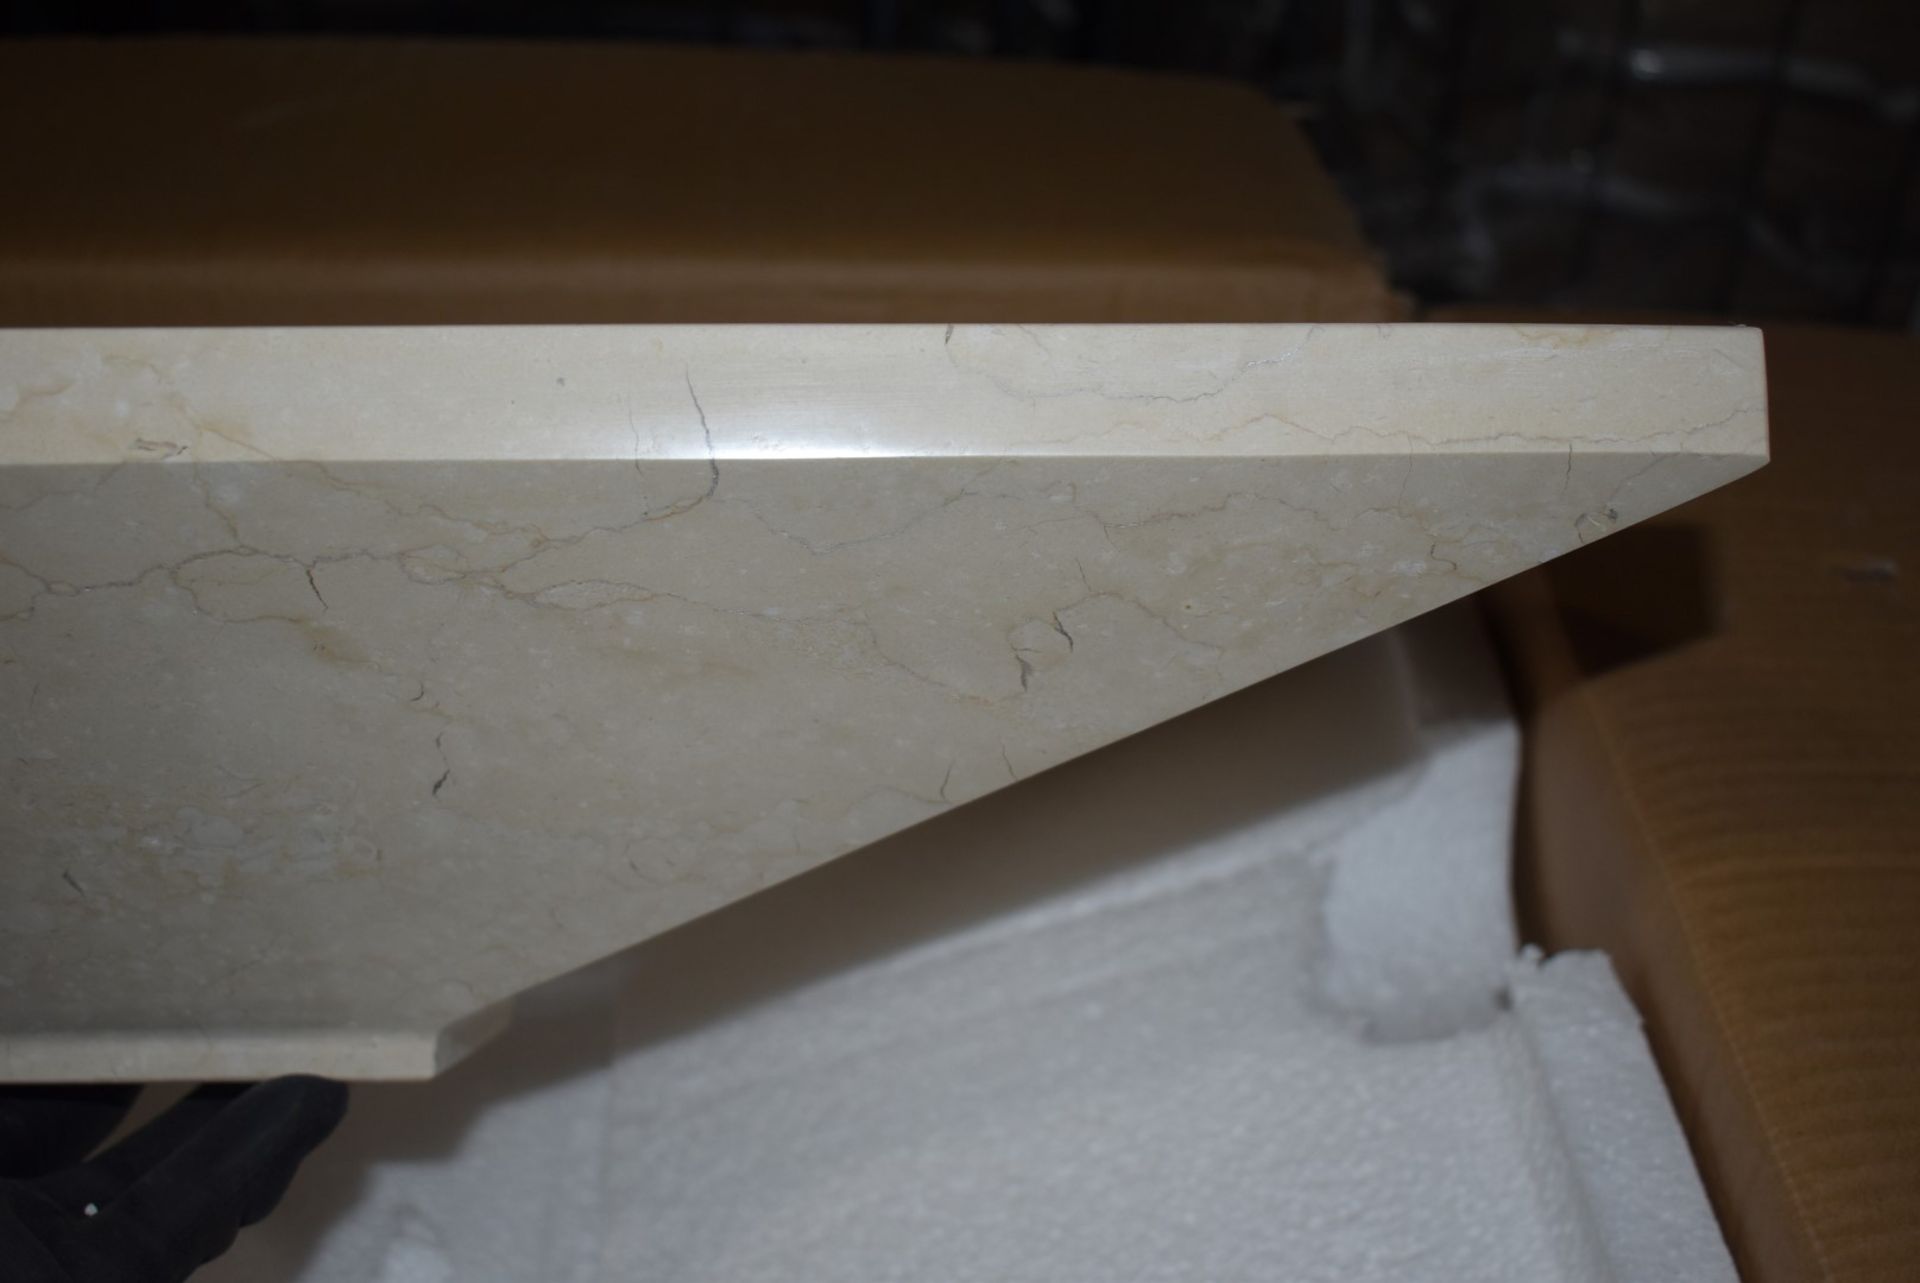 1 x Stonearth 'Karo' Solid Galala Marble Stone Countertop Sink Basin - New Boxed Stock - RRP £ - Image 2 of 8